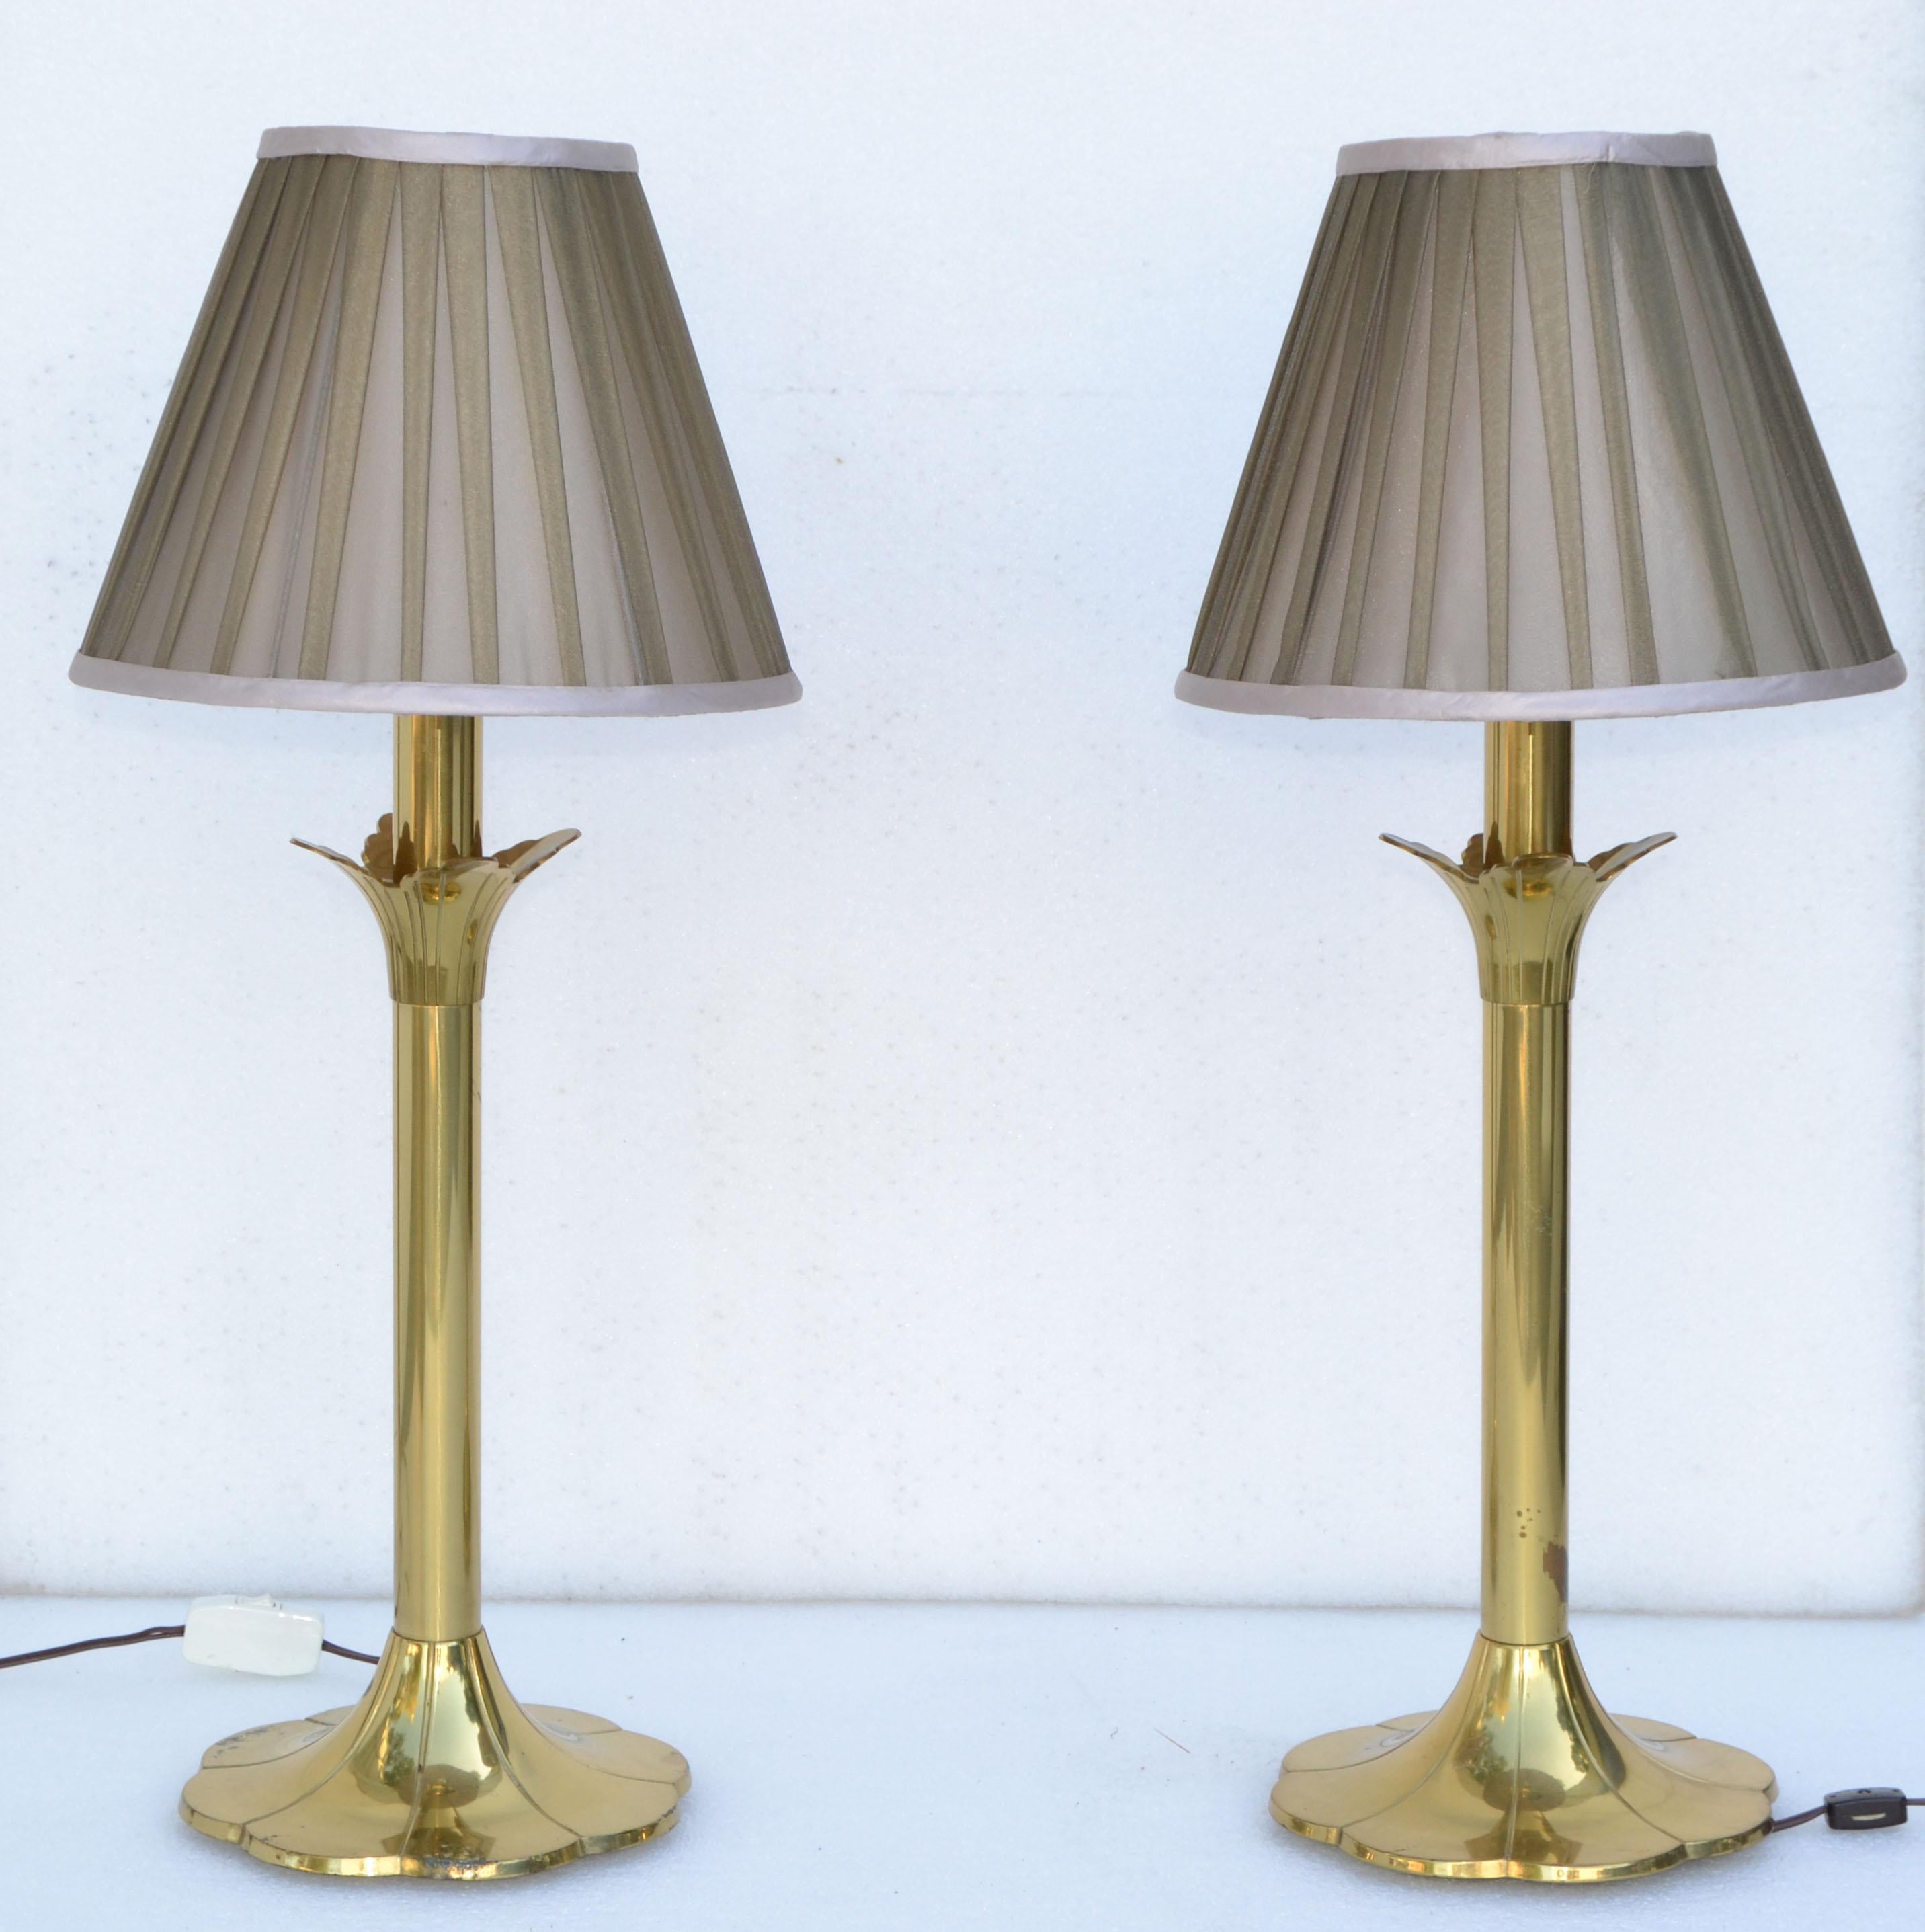 Polished Pair of Stiffel Brass Table Lamps & Shades Mid-Century Modern American 1990 For Sale